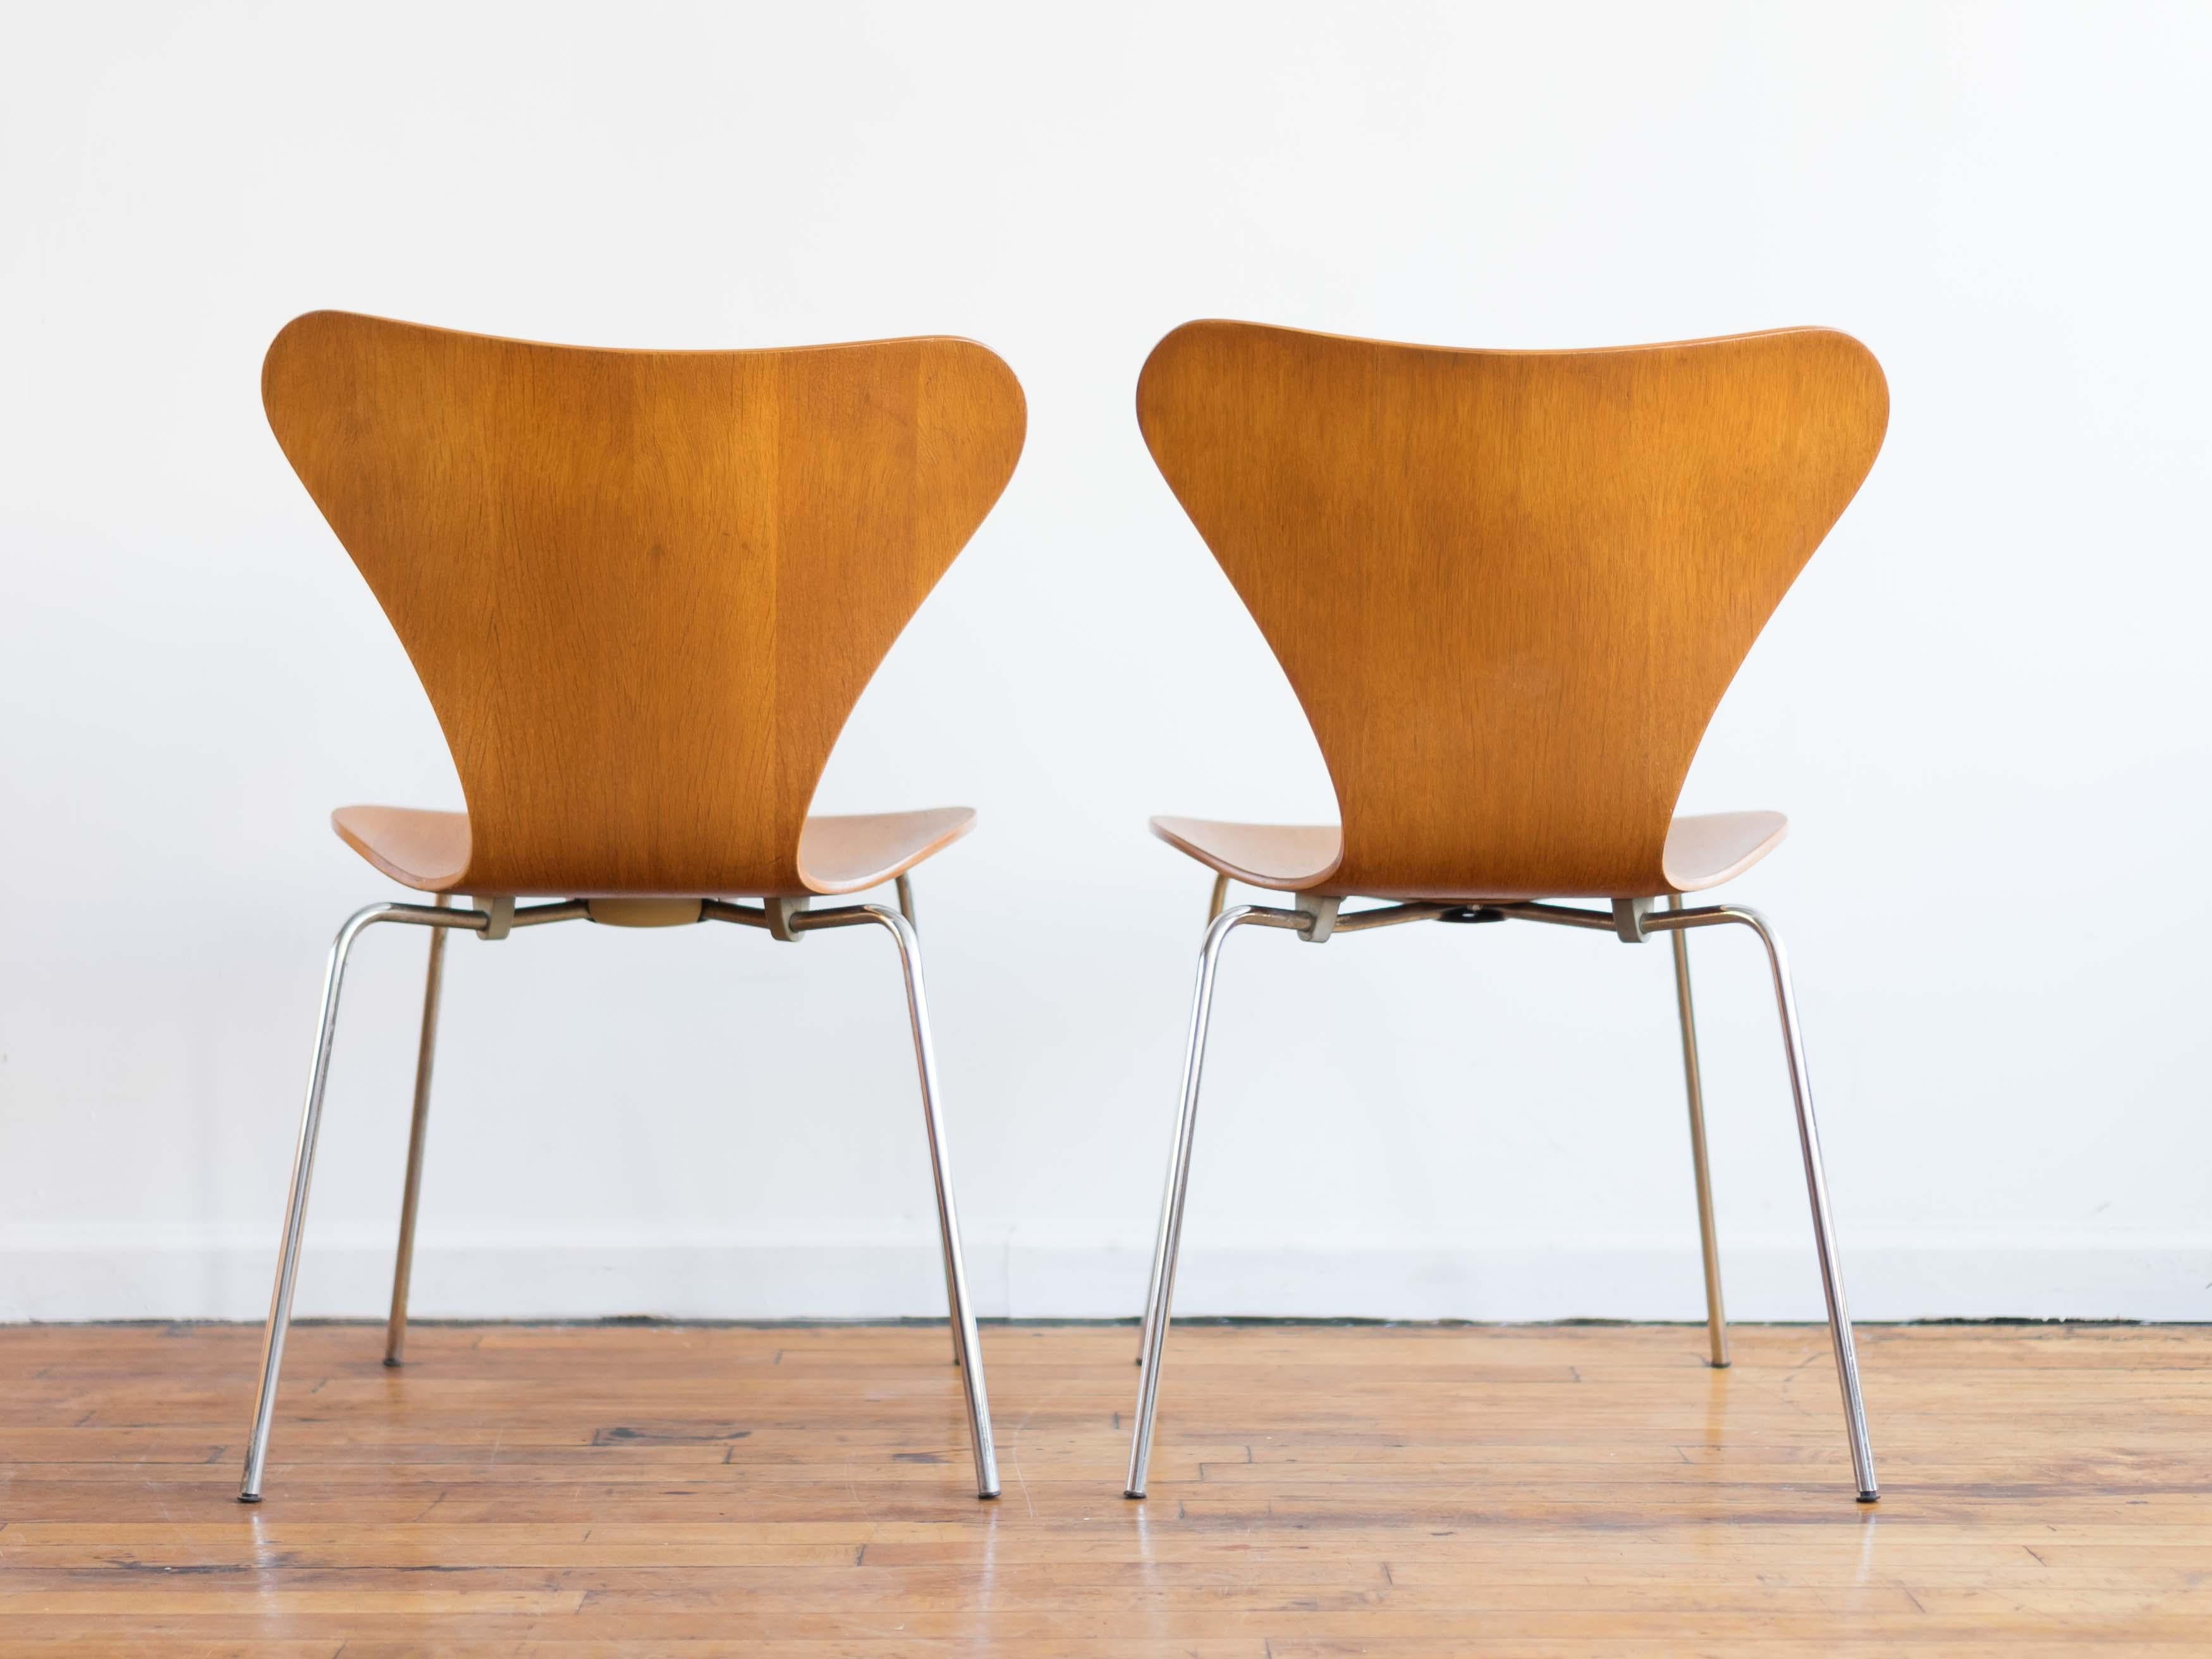 Pair of Arne Jacobson's iconic butterfly chairs, designed for for Fritz Hansen in the 1950s. Constructed of bent plywood in European oak with chrome legs. The rift-sawn oak displays its characteristic flecks and rays beautifully. 

These have been